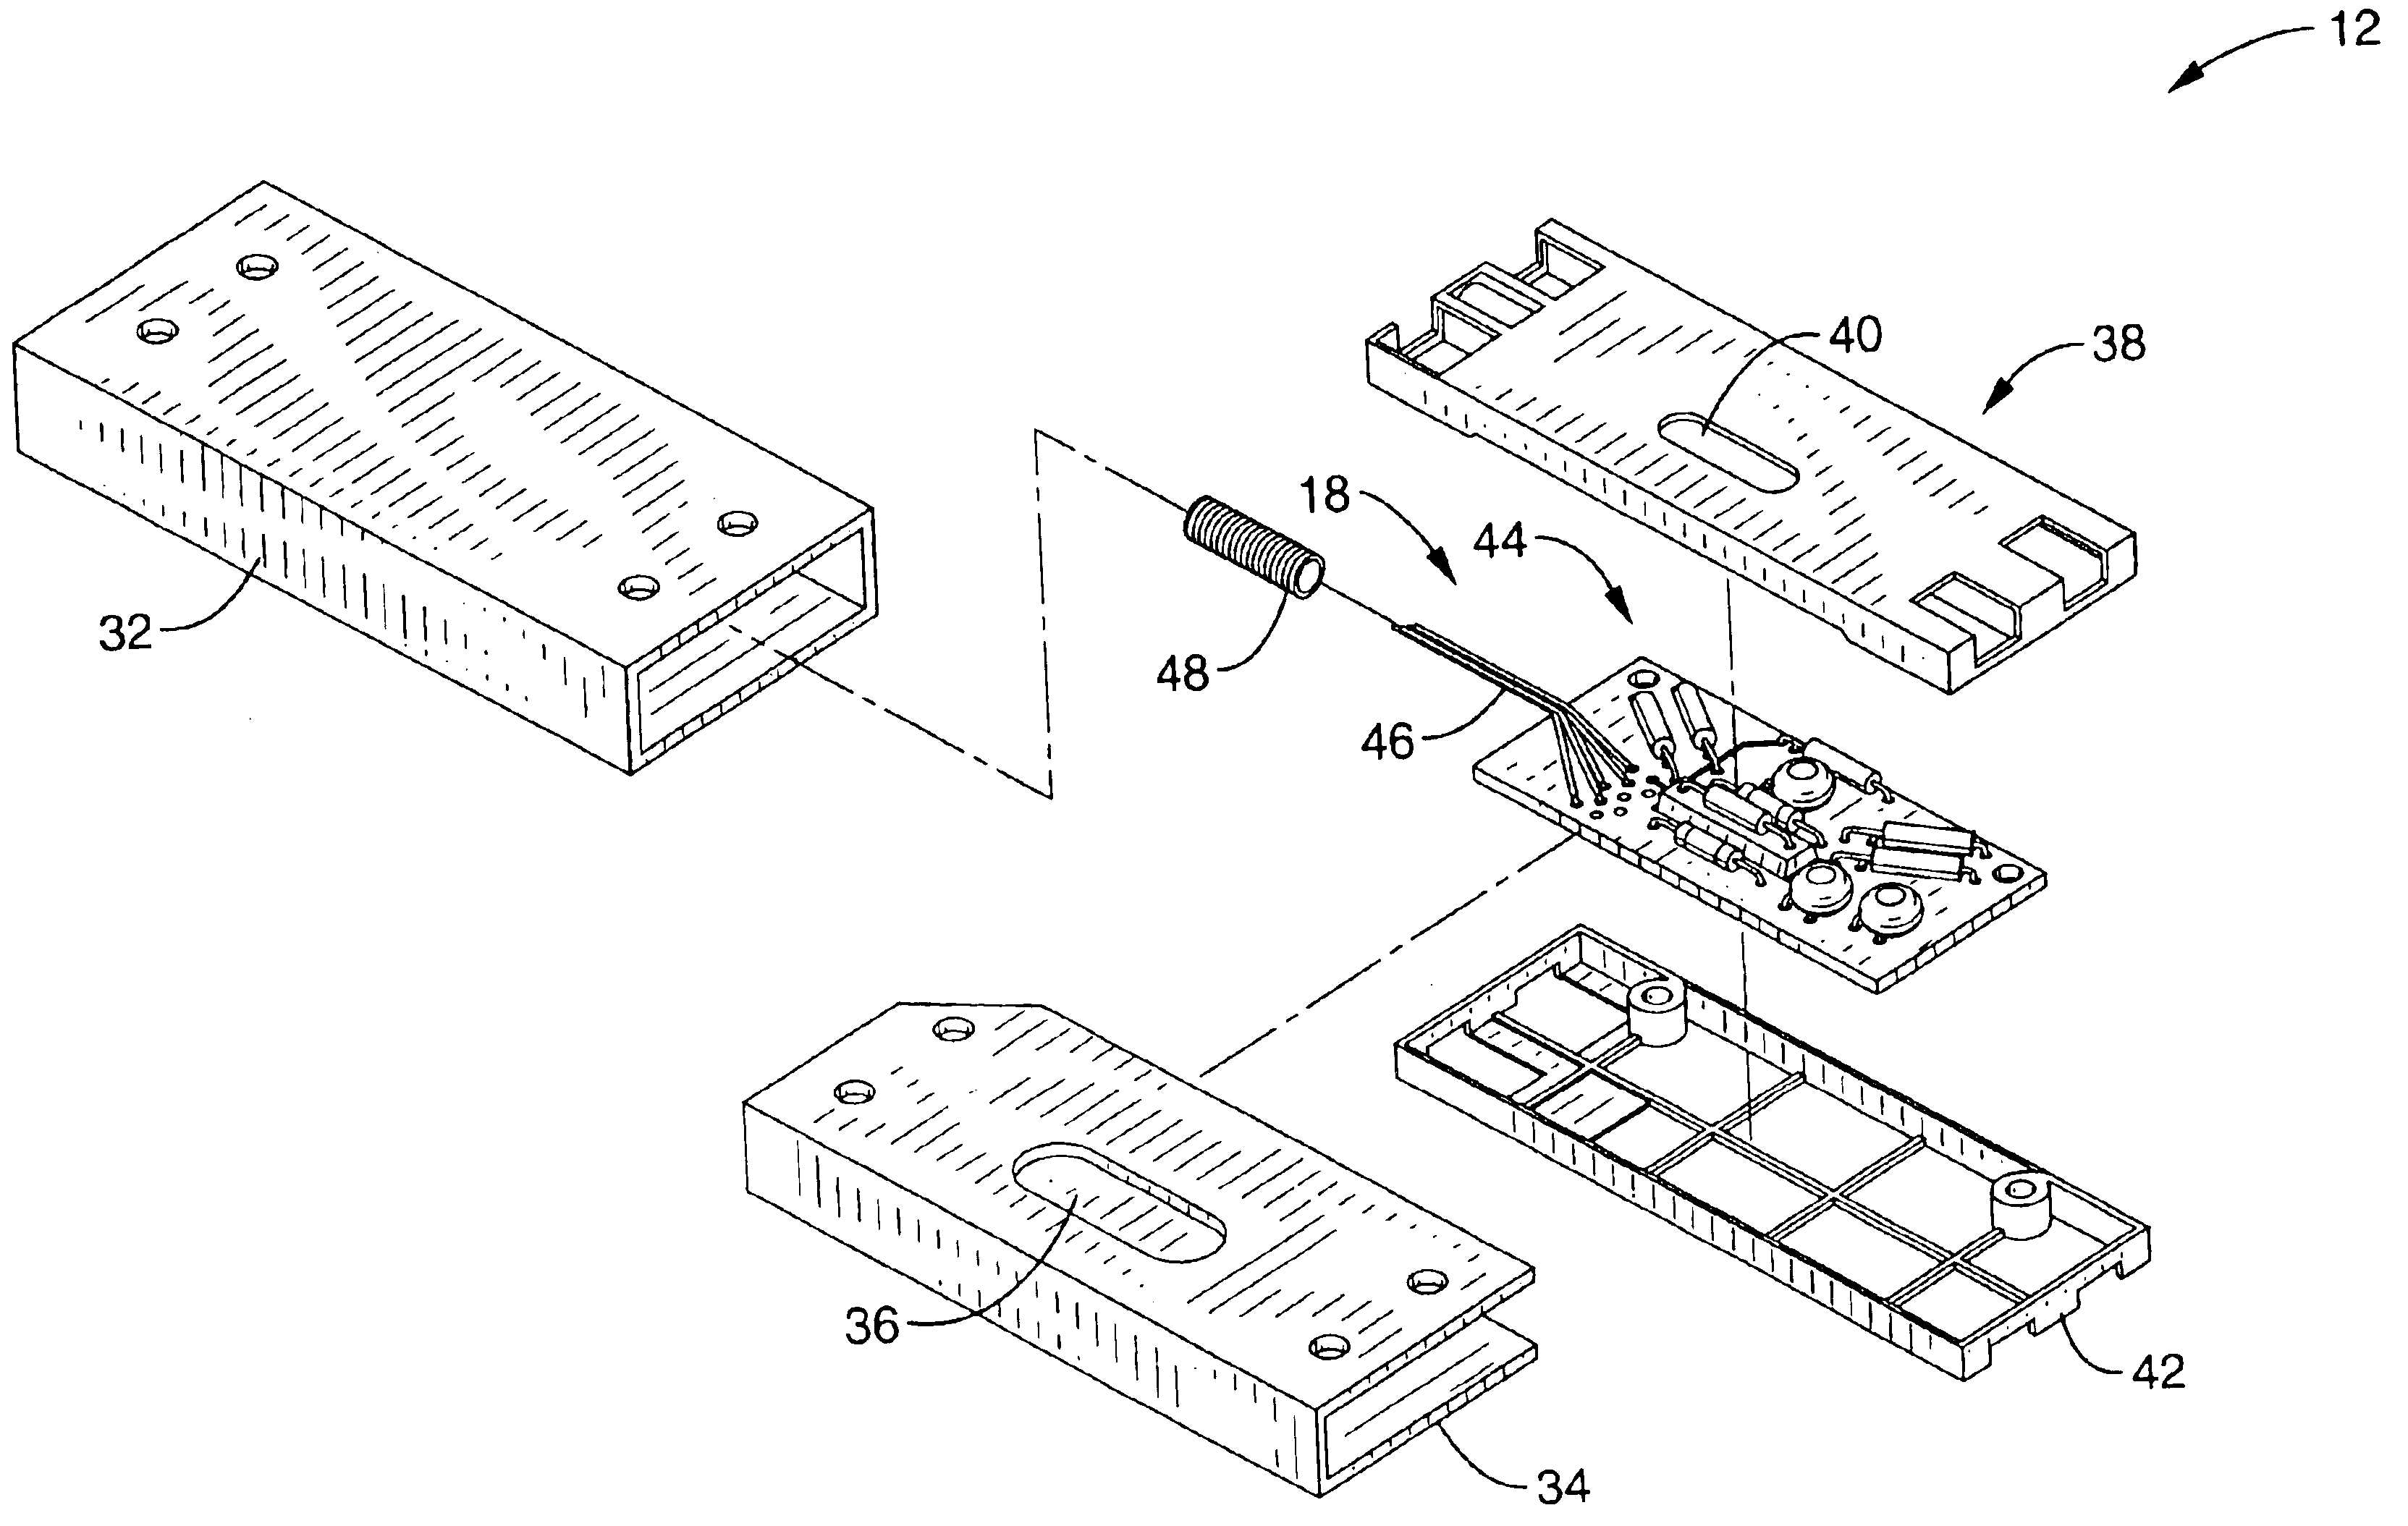 Tamper resistant magnetic contact apparatus for security systems